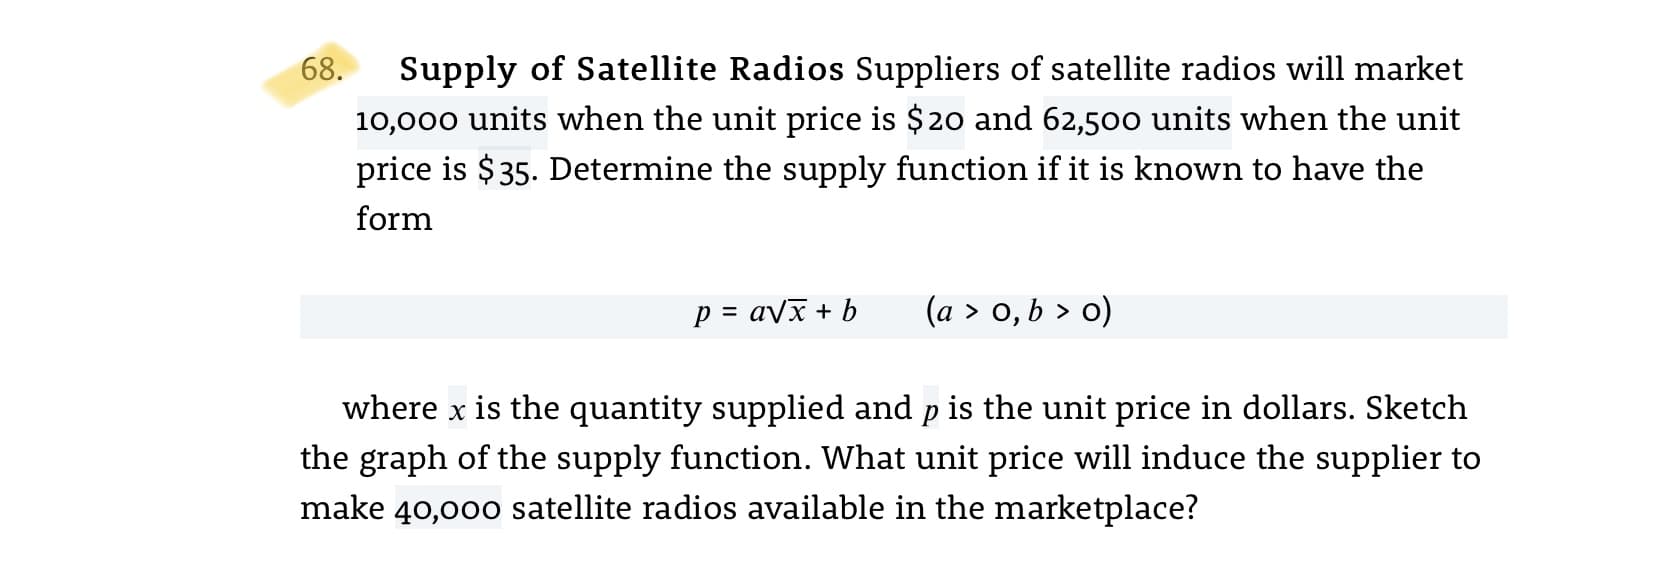 68.
Supply of Satellite Radios Suppliers of satellite radios will market
10,000 units when the unit price is $20 and 62,500 units when the unit
price is $35. Determine the supply function if it is known to have the
form
p = avx + b
(a > 0, b > o)
where x is the quantity supplied and p is the unit price in dollars. Sketch
the graph of the supply function. What unit price will induce the supplier to
make 40,000 satellite radios available in the marketplace?
